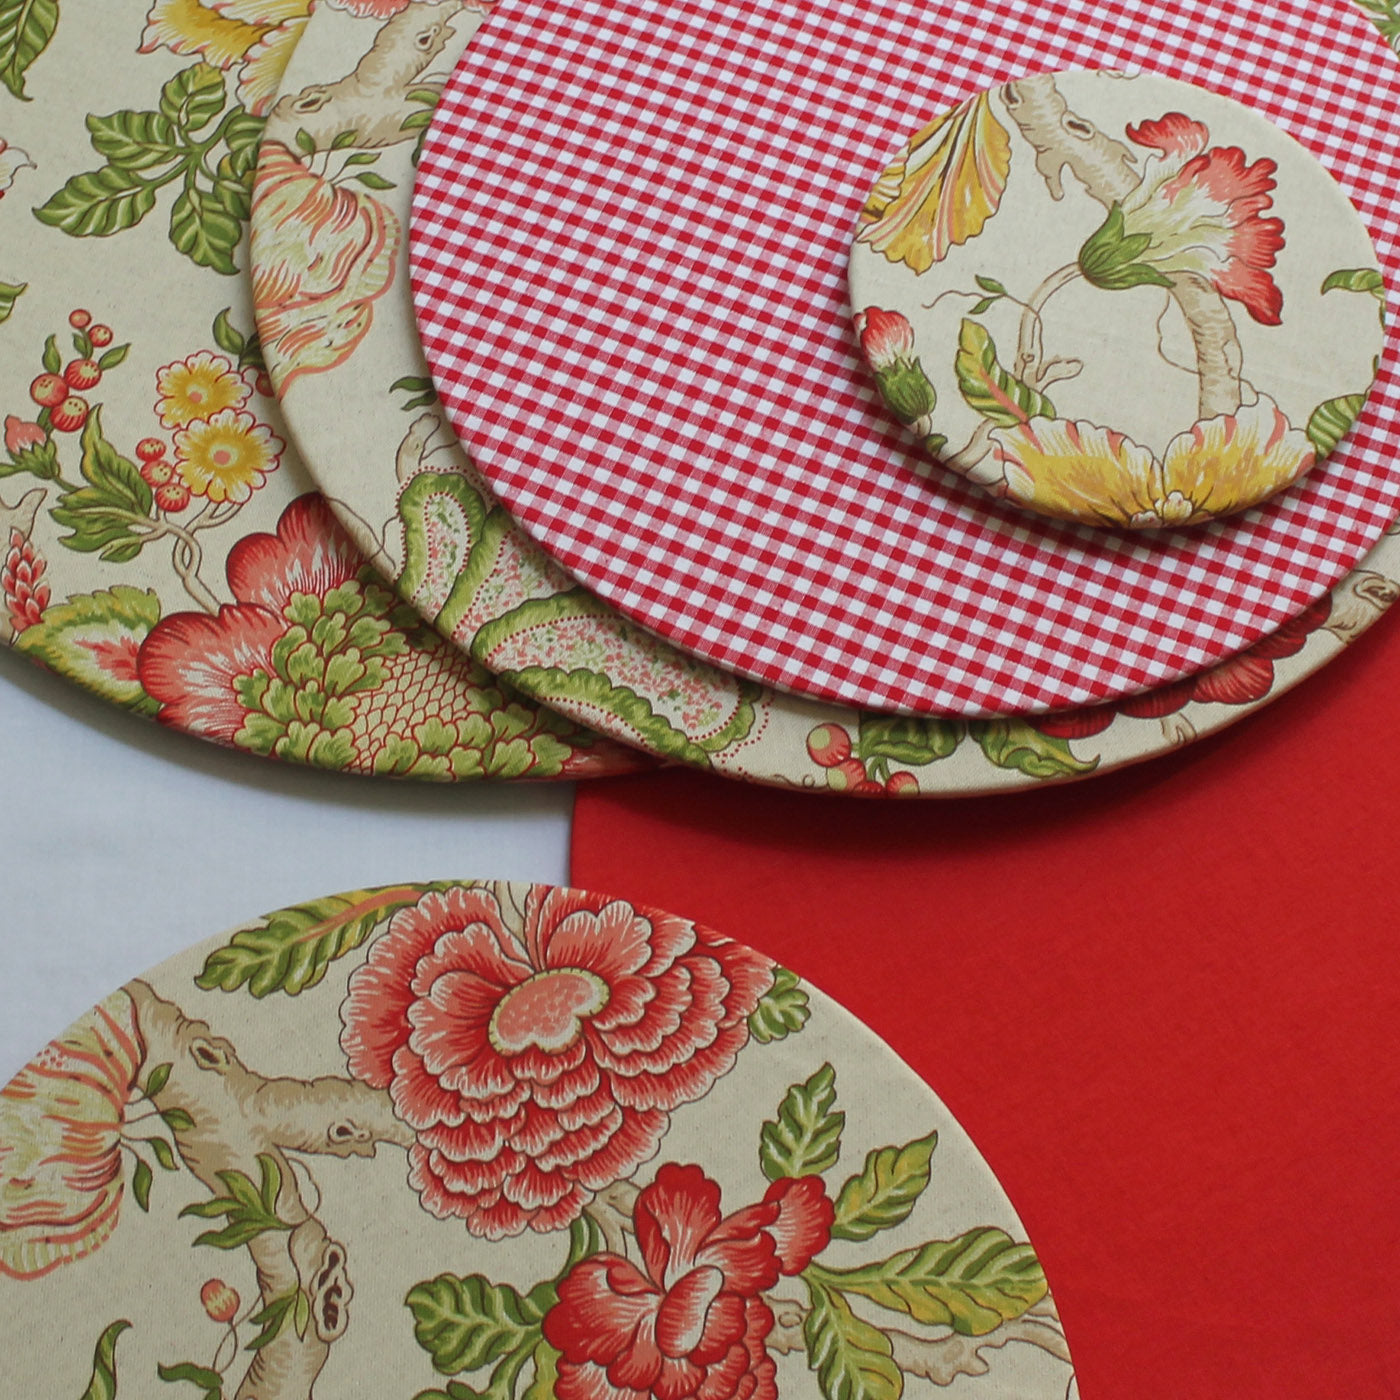 Set of 2 Cuffiette Extra-Small Round Floral Placemats #3 - Alternative view 2